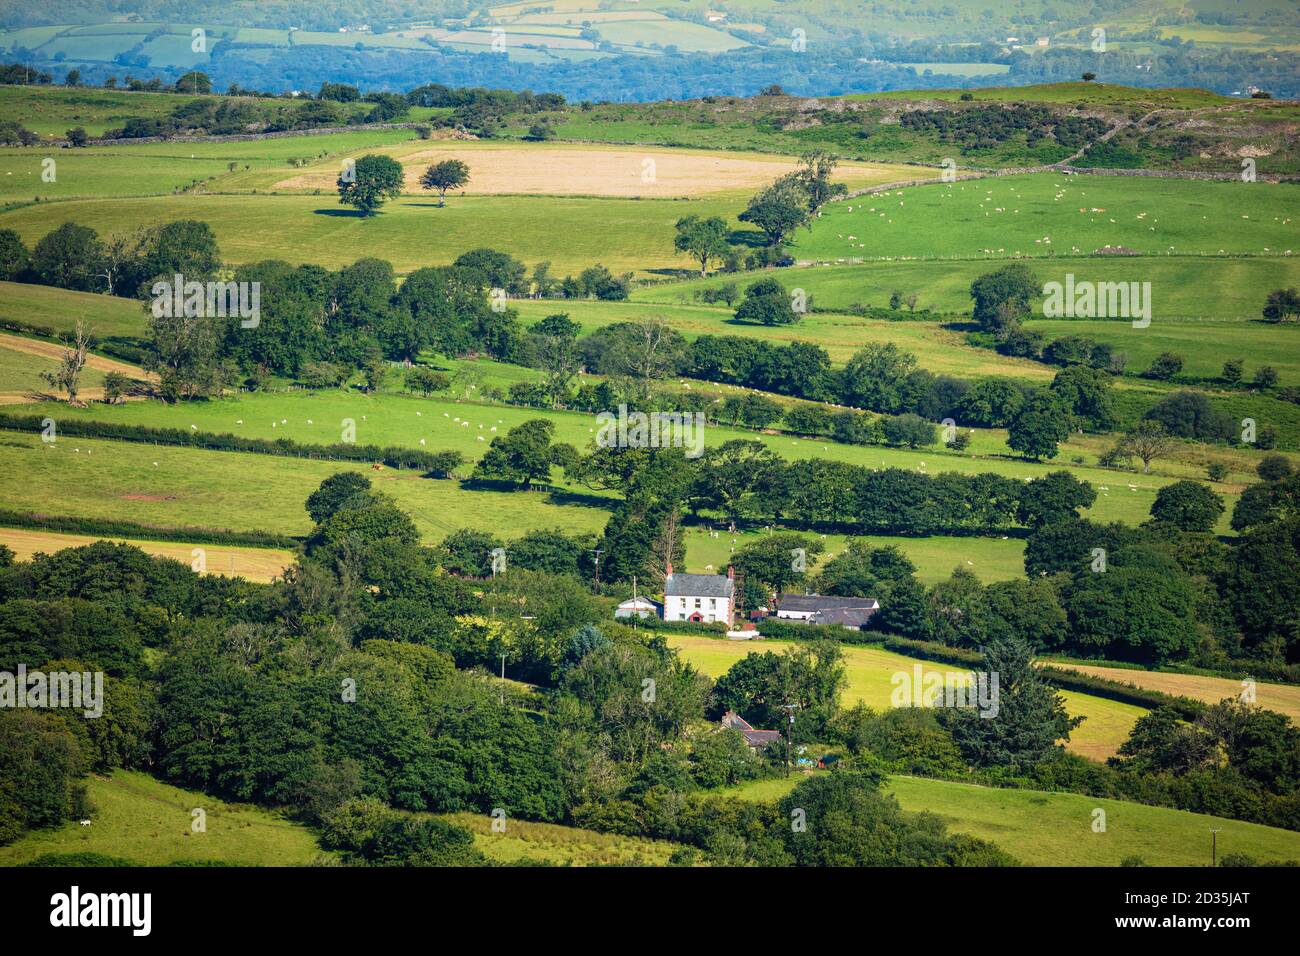 UK, Wales, Carmarthenshire, Llandeilo, Brecon Beacons national park. Rural scene of fields, hedgerows, moorland and a traditional white Welsh cottage Stock Photo